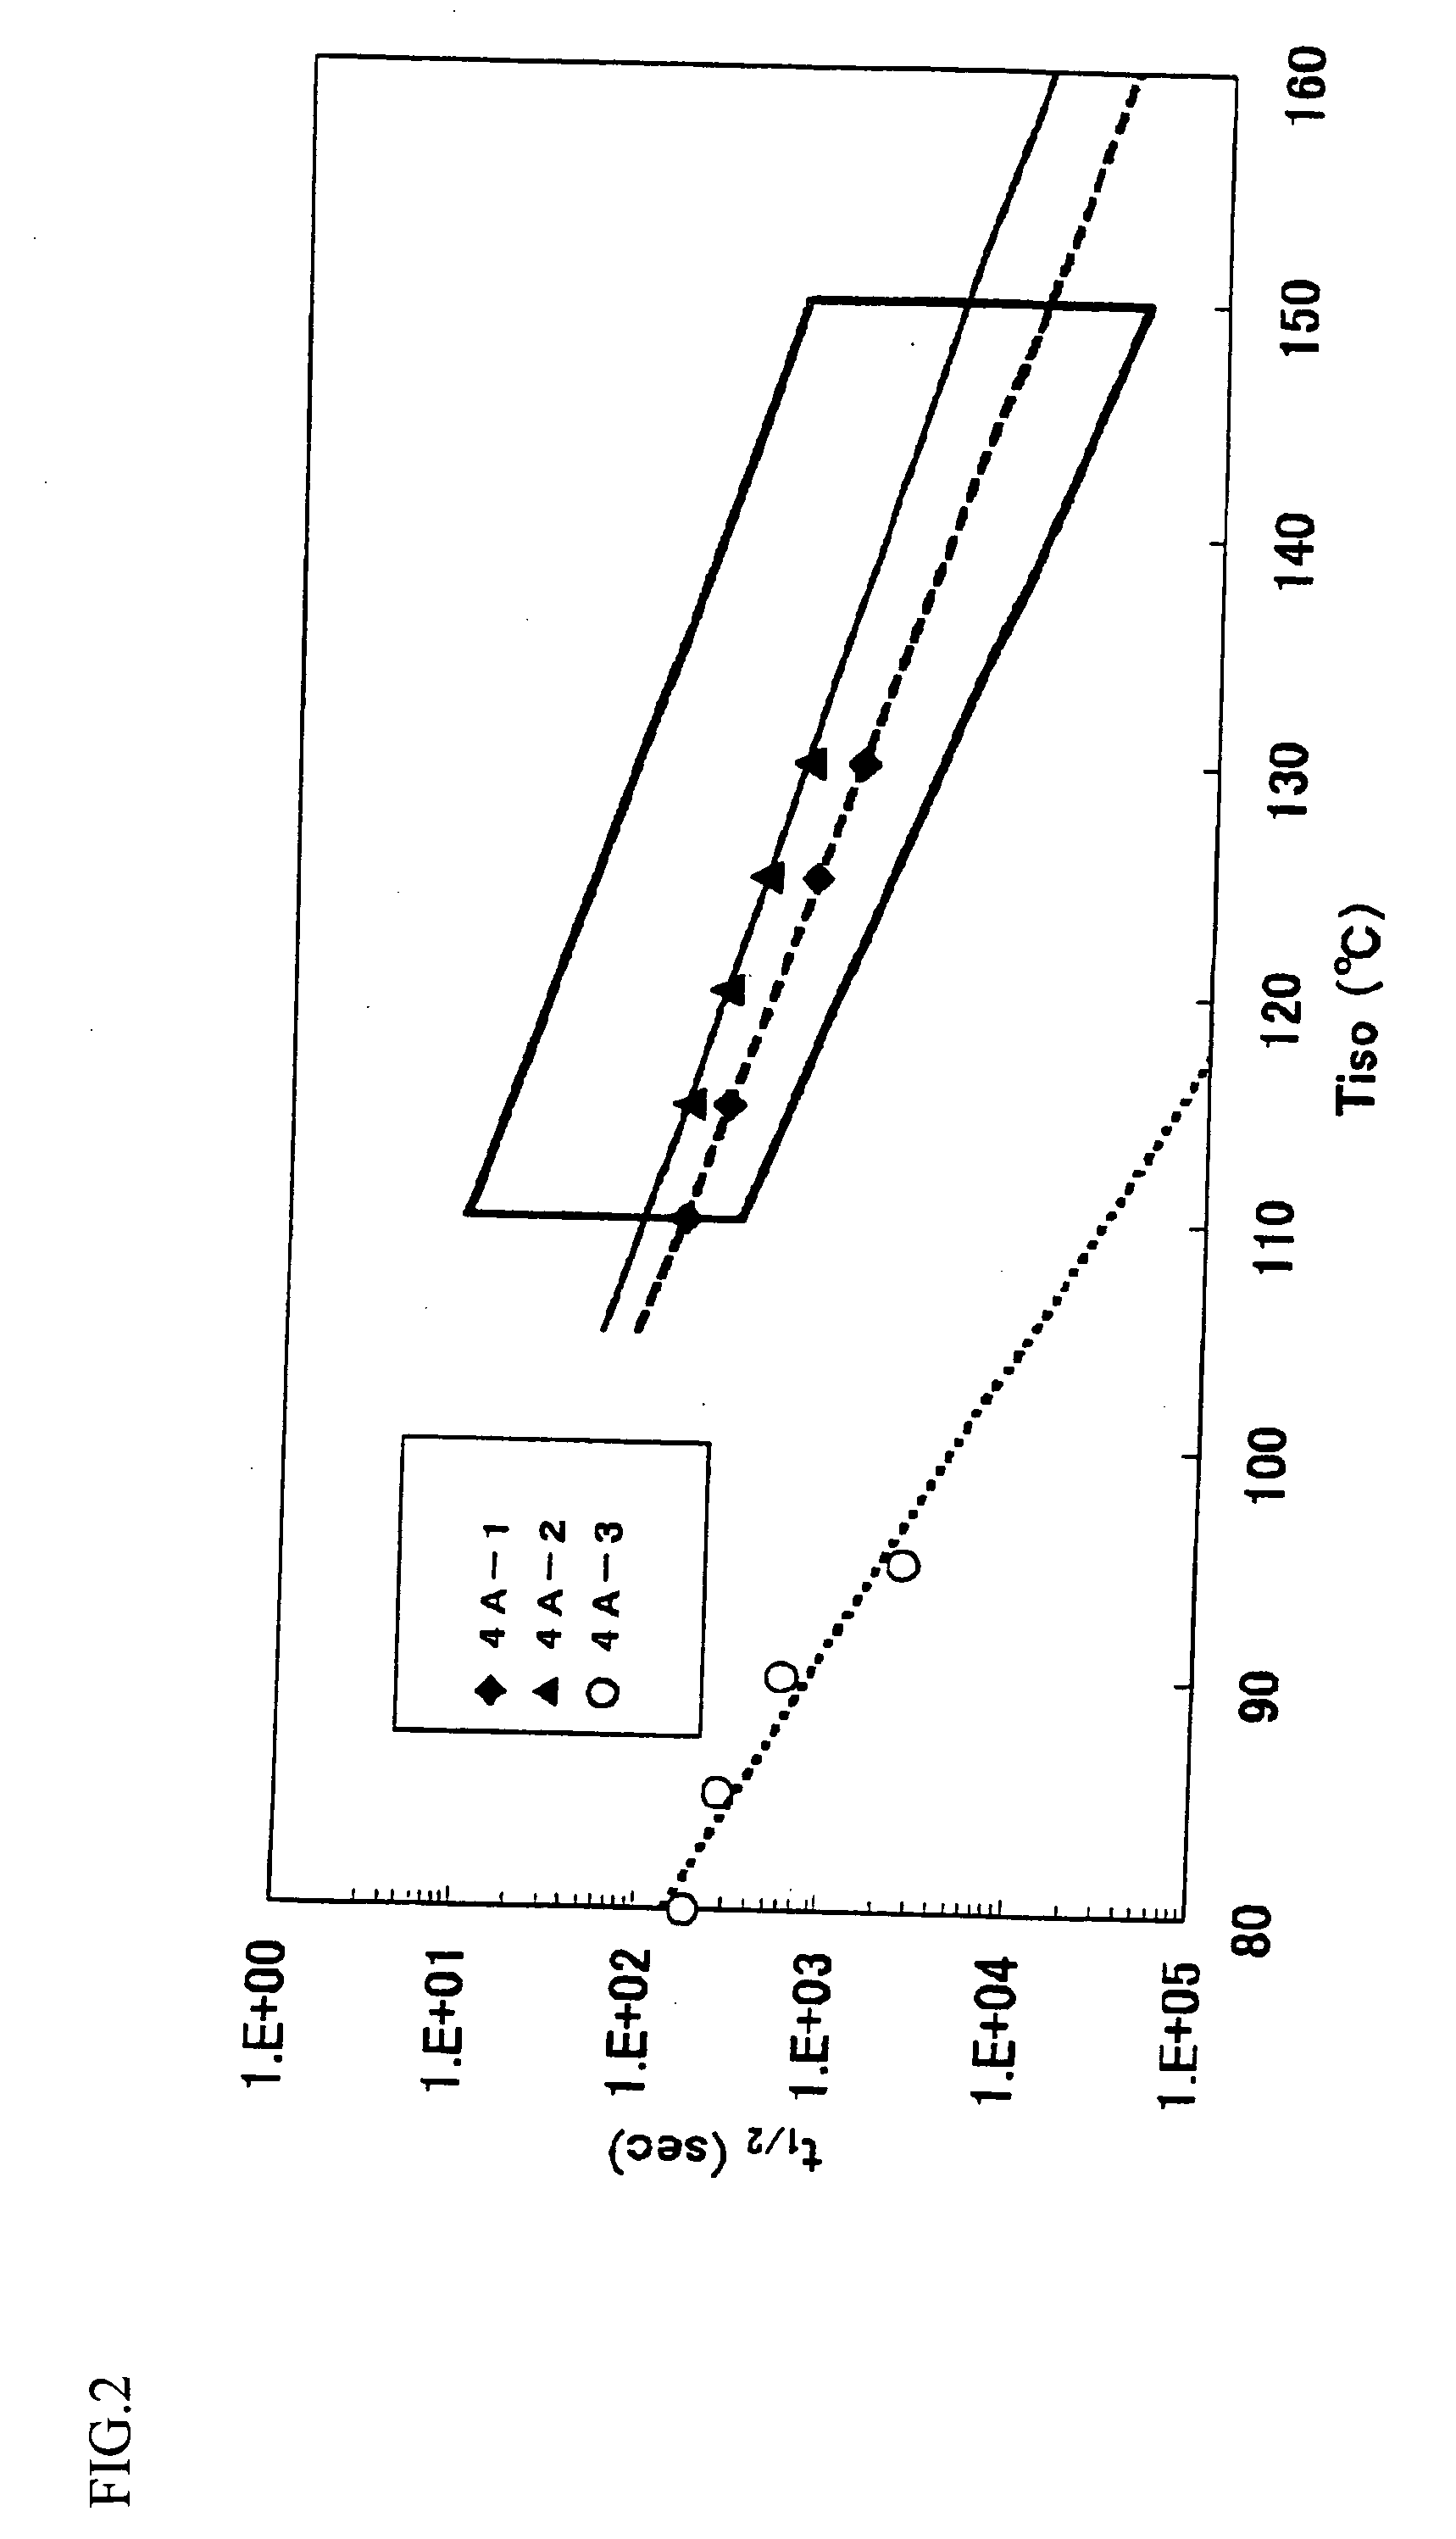 Catalyst for olefin polymerization, method for producing olefin polymer, method for producing propylene-based copolymer, propylene polymer, propylene-based polymer composition, and use of those